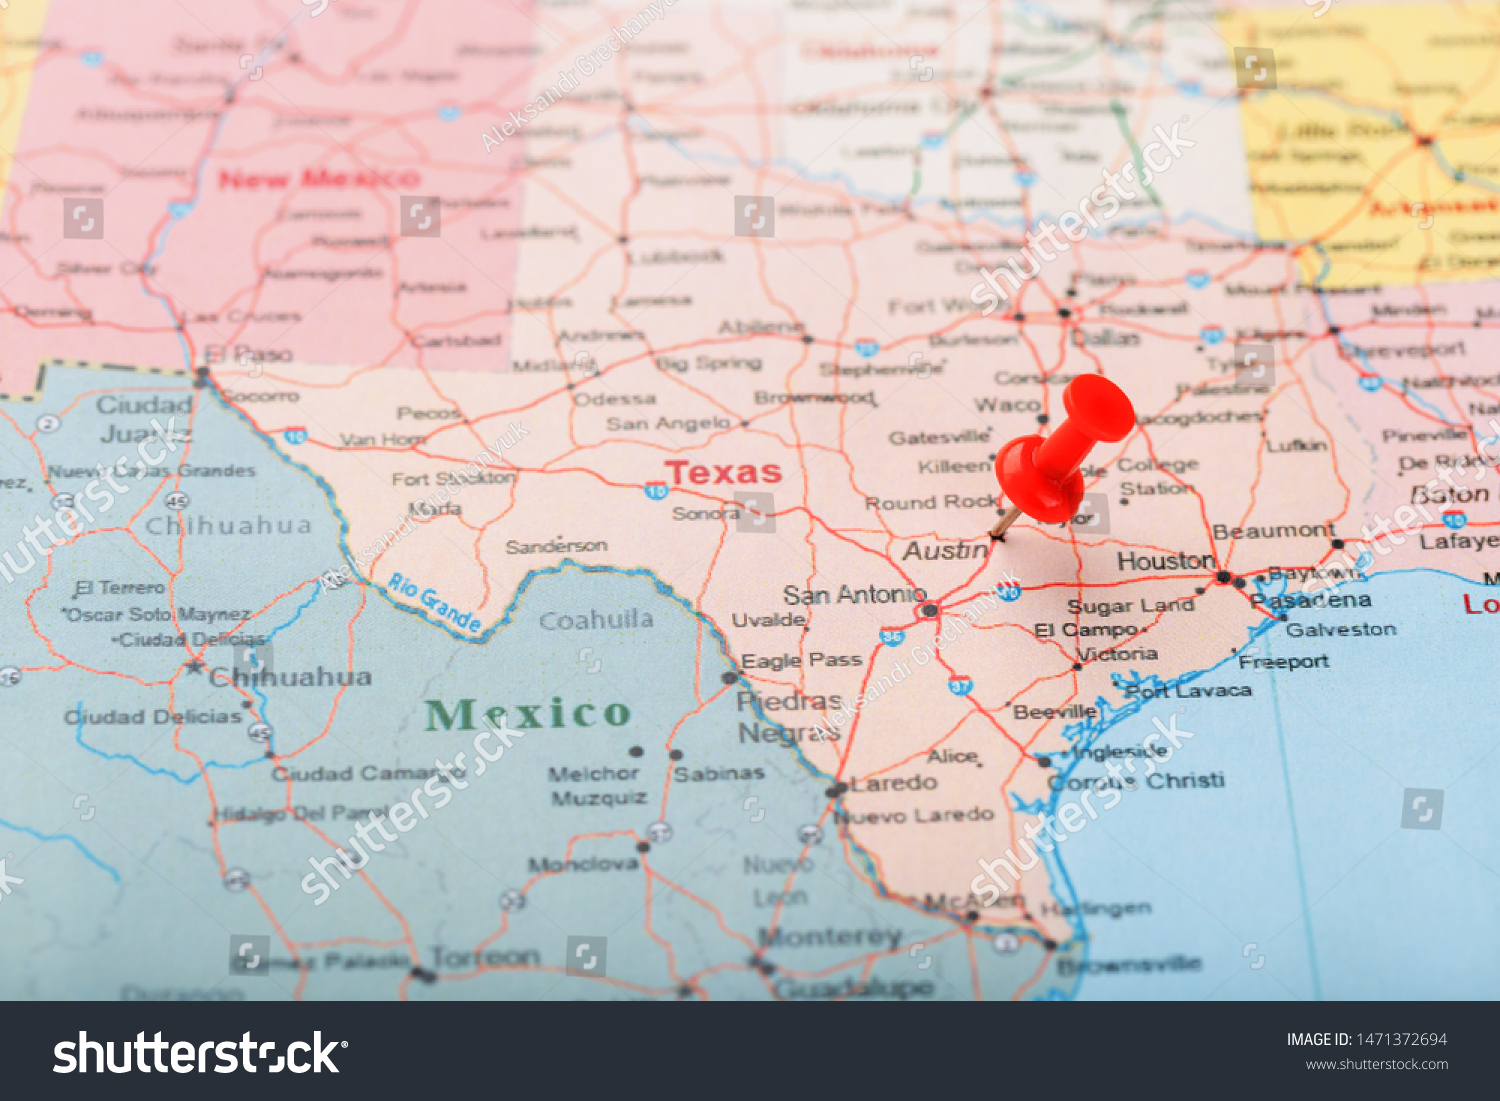 Red Clerical Needle On Map Usa Stock Photo Edit Now 1471372694